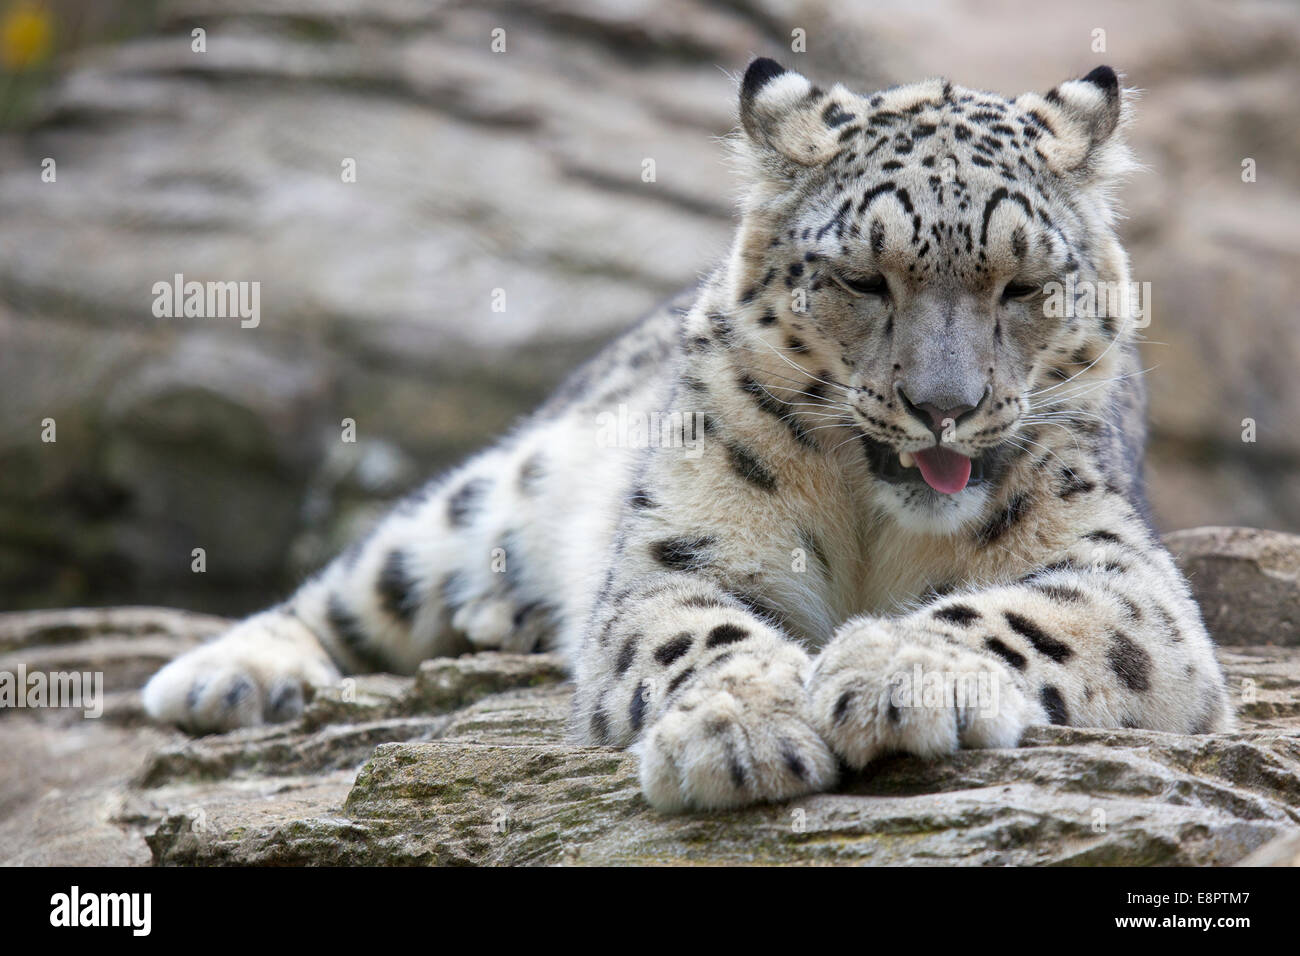 A young Snow Leopard resting on some rocks Stock Photo